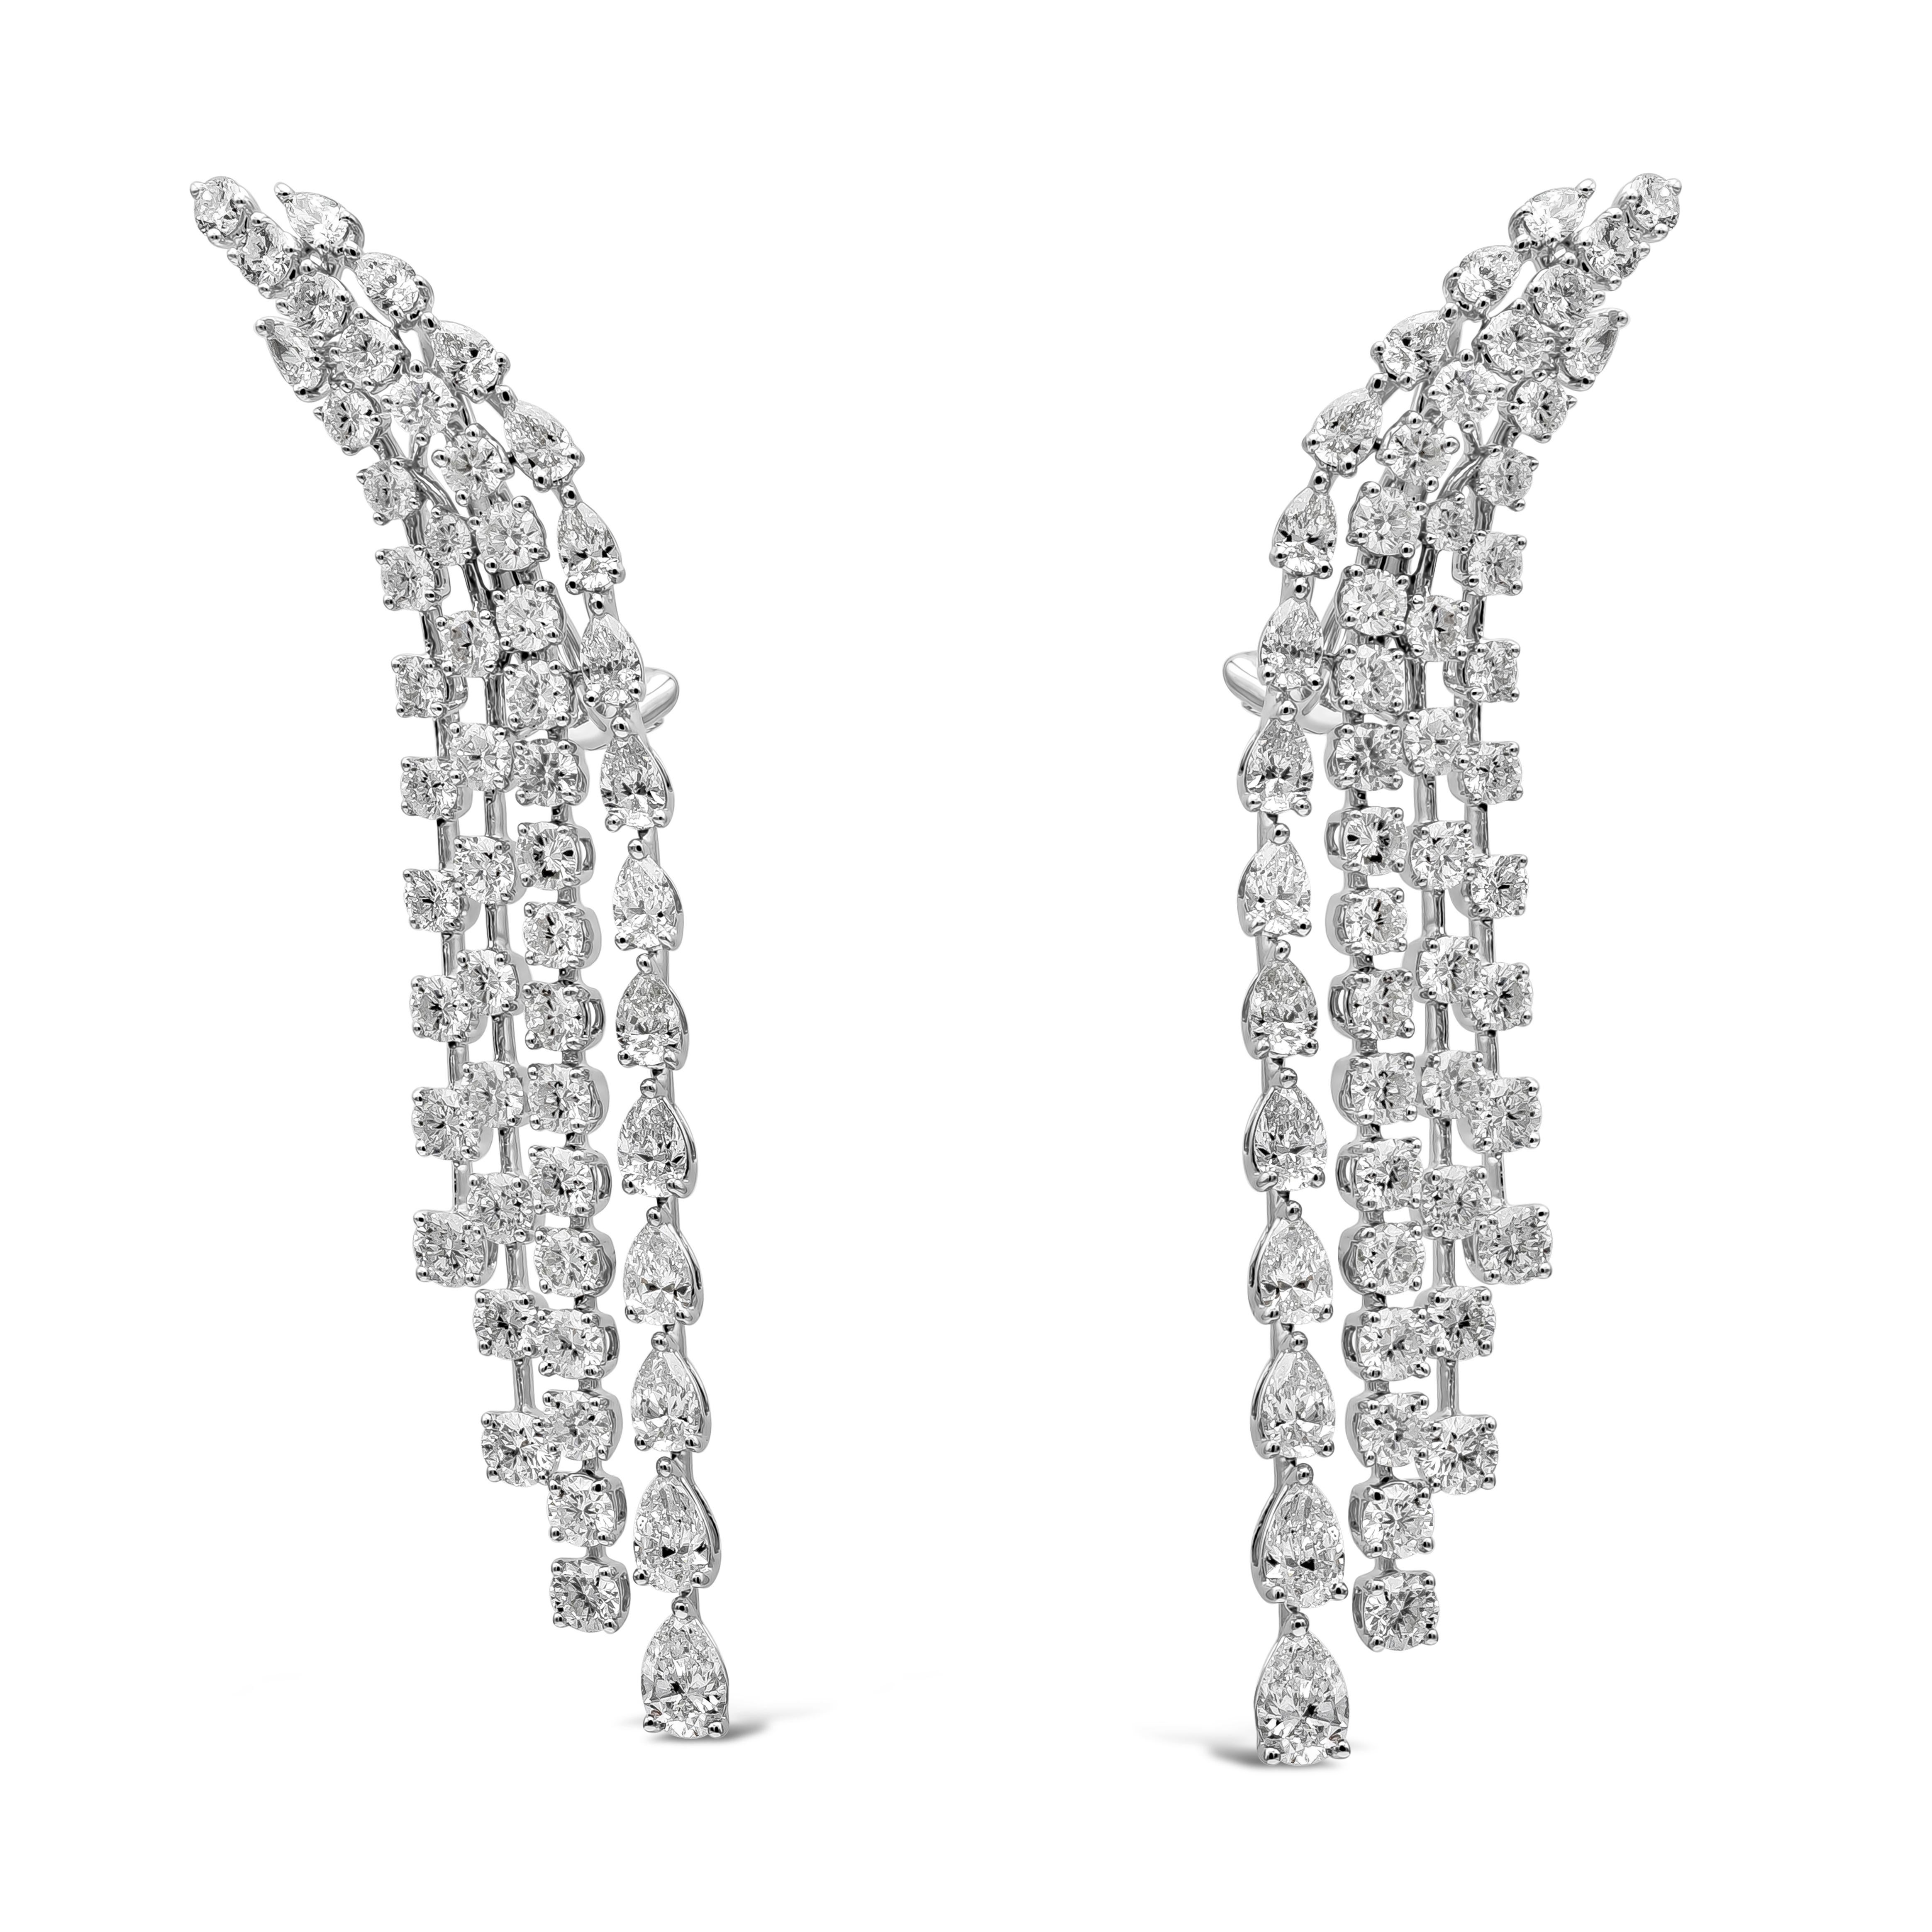 A sophisticated piece of jewelry showcasing five-rows of round brilliant pear shape illusion diamonds set in an elegant chandelier waterfall design. Total carat weight of the diamonds is 9.98 carats. The piece is 65mm in length, 18mm in width and